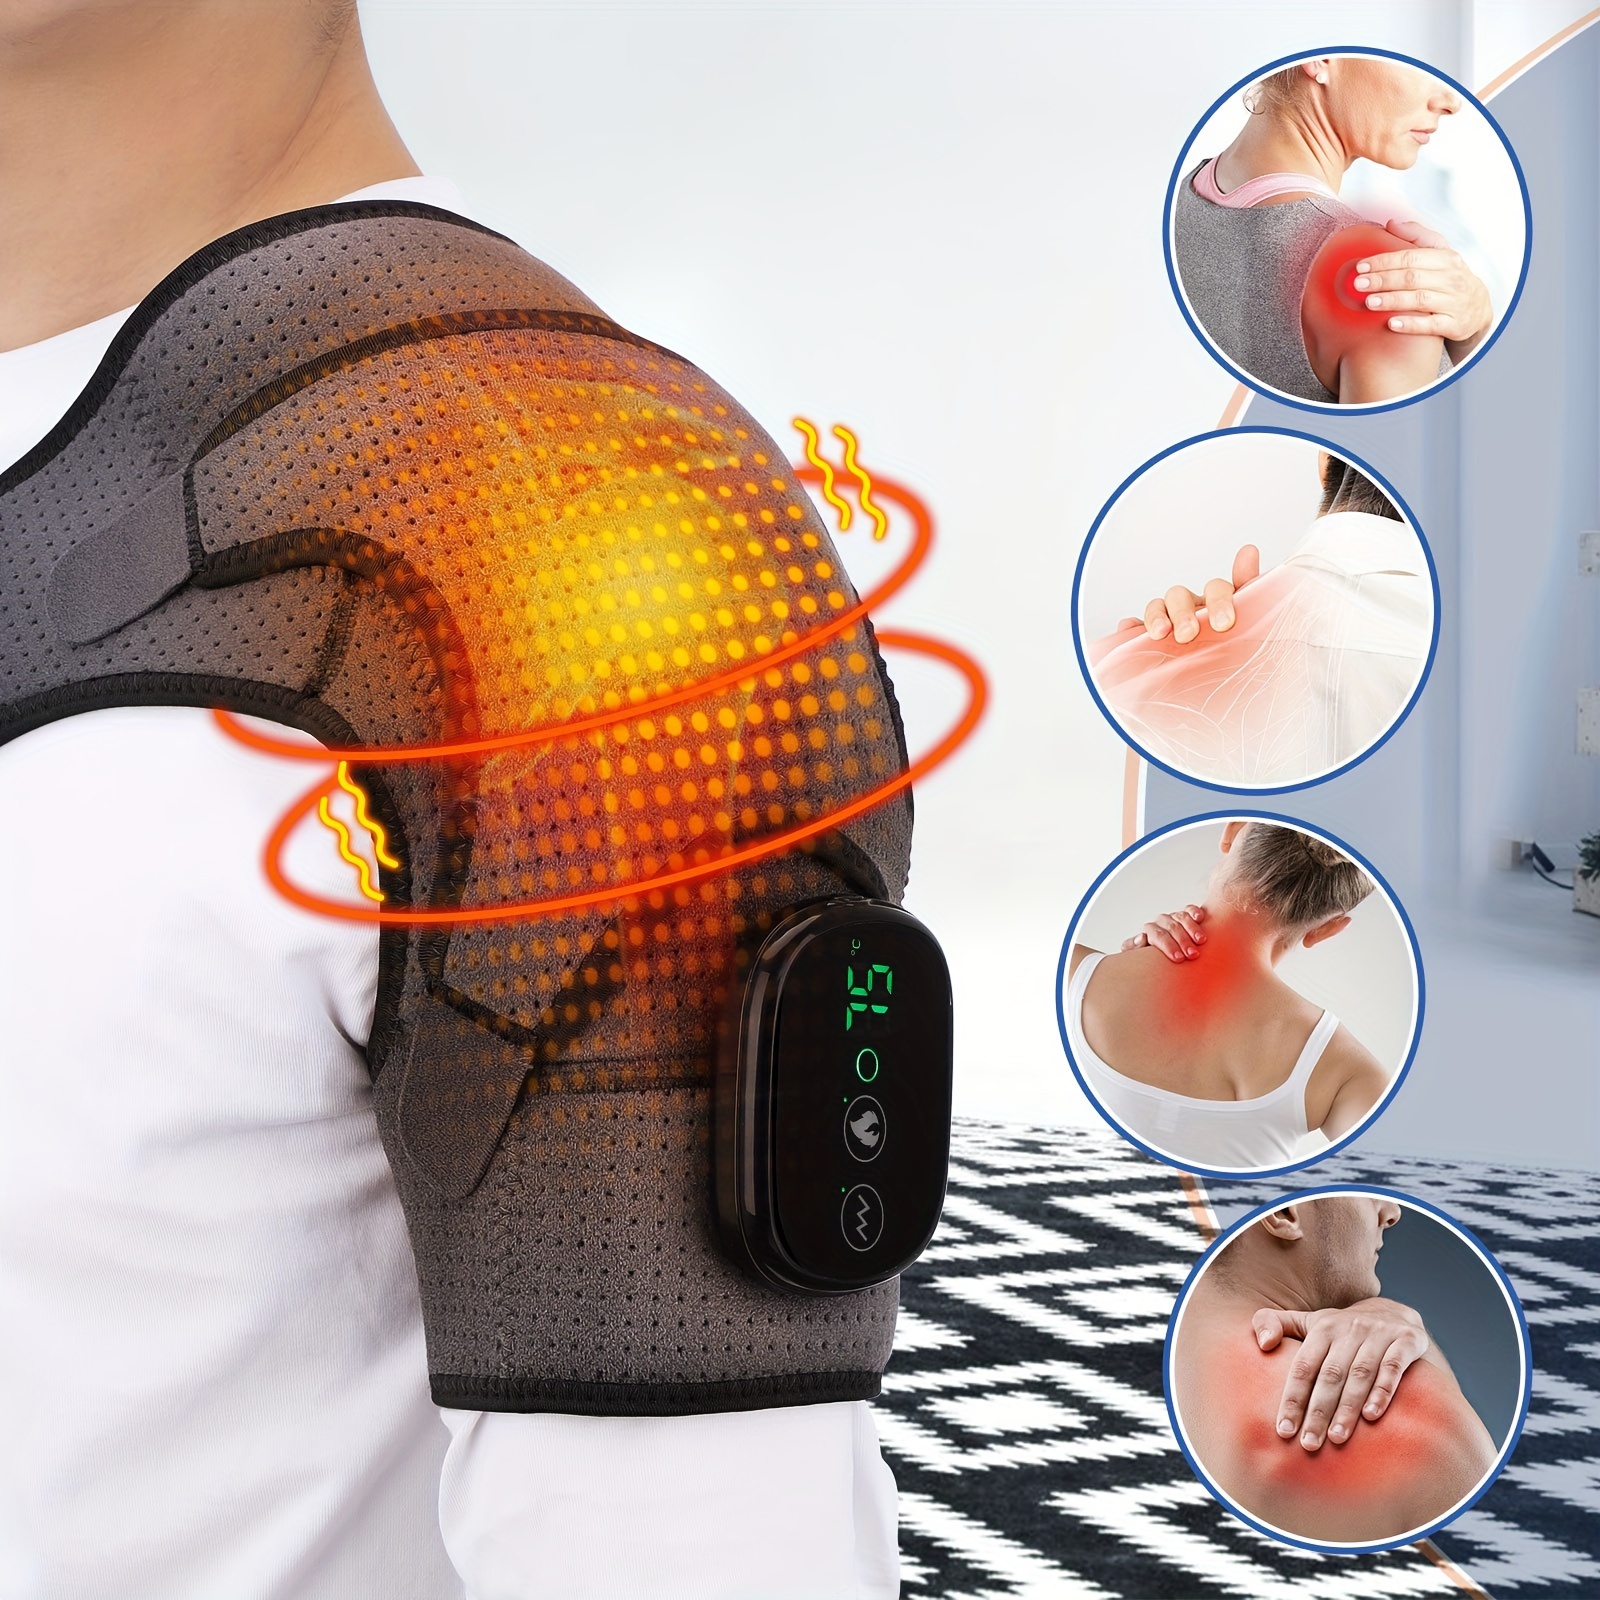  NURSAL Shiatsu Neck and Shoulder Massager, Lower Back Massager  with Heat for Back Pain with Electric Deep Tissue 3D Kneading Massage  Pillow for Neck, Back, Shoulder, Foot Body Pain Relief 